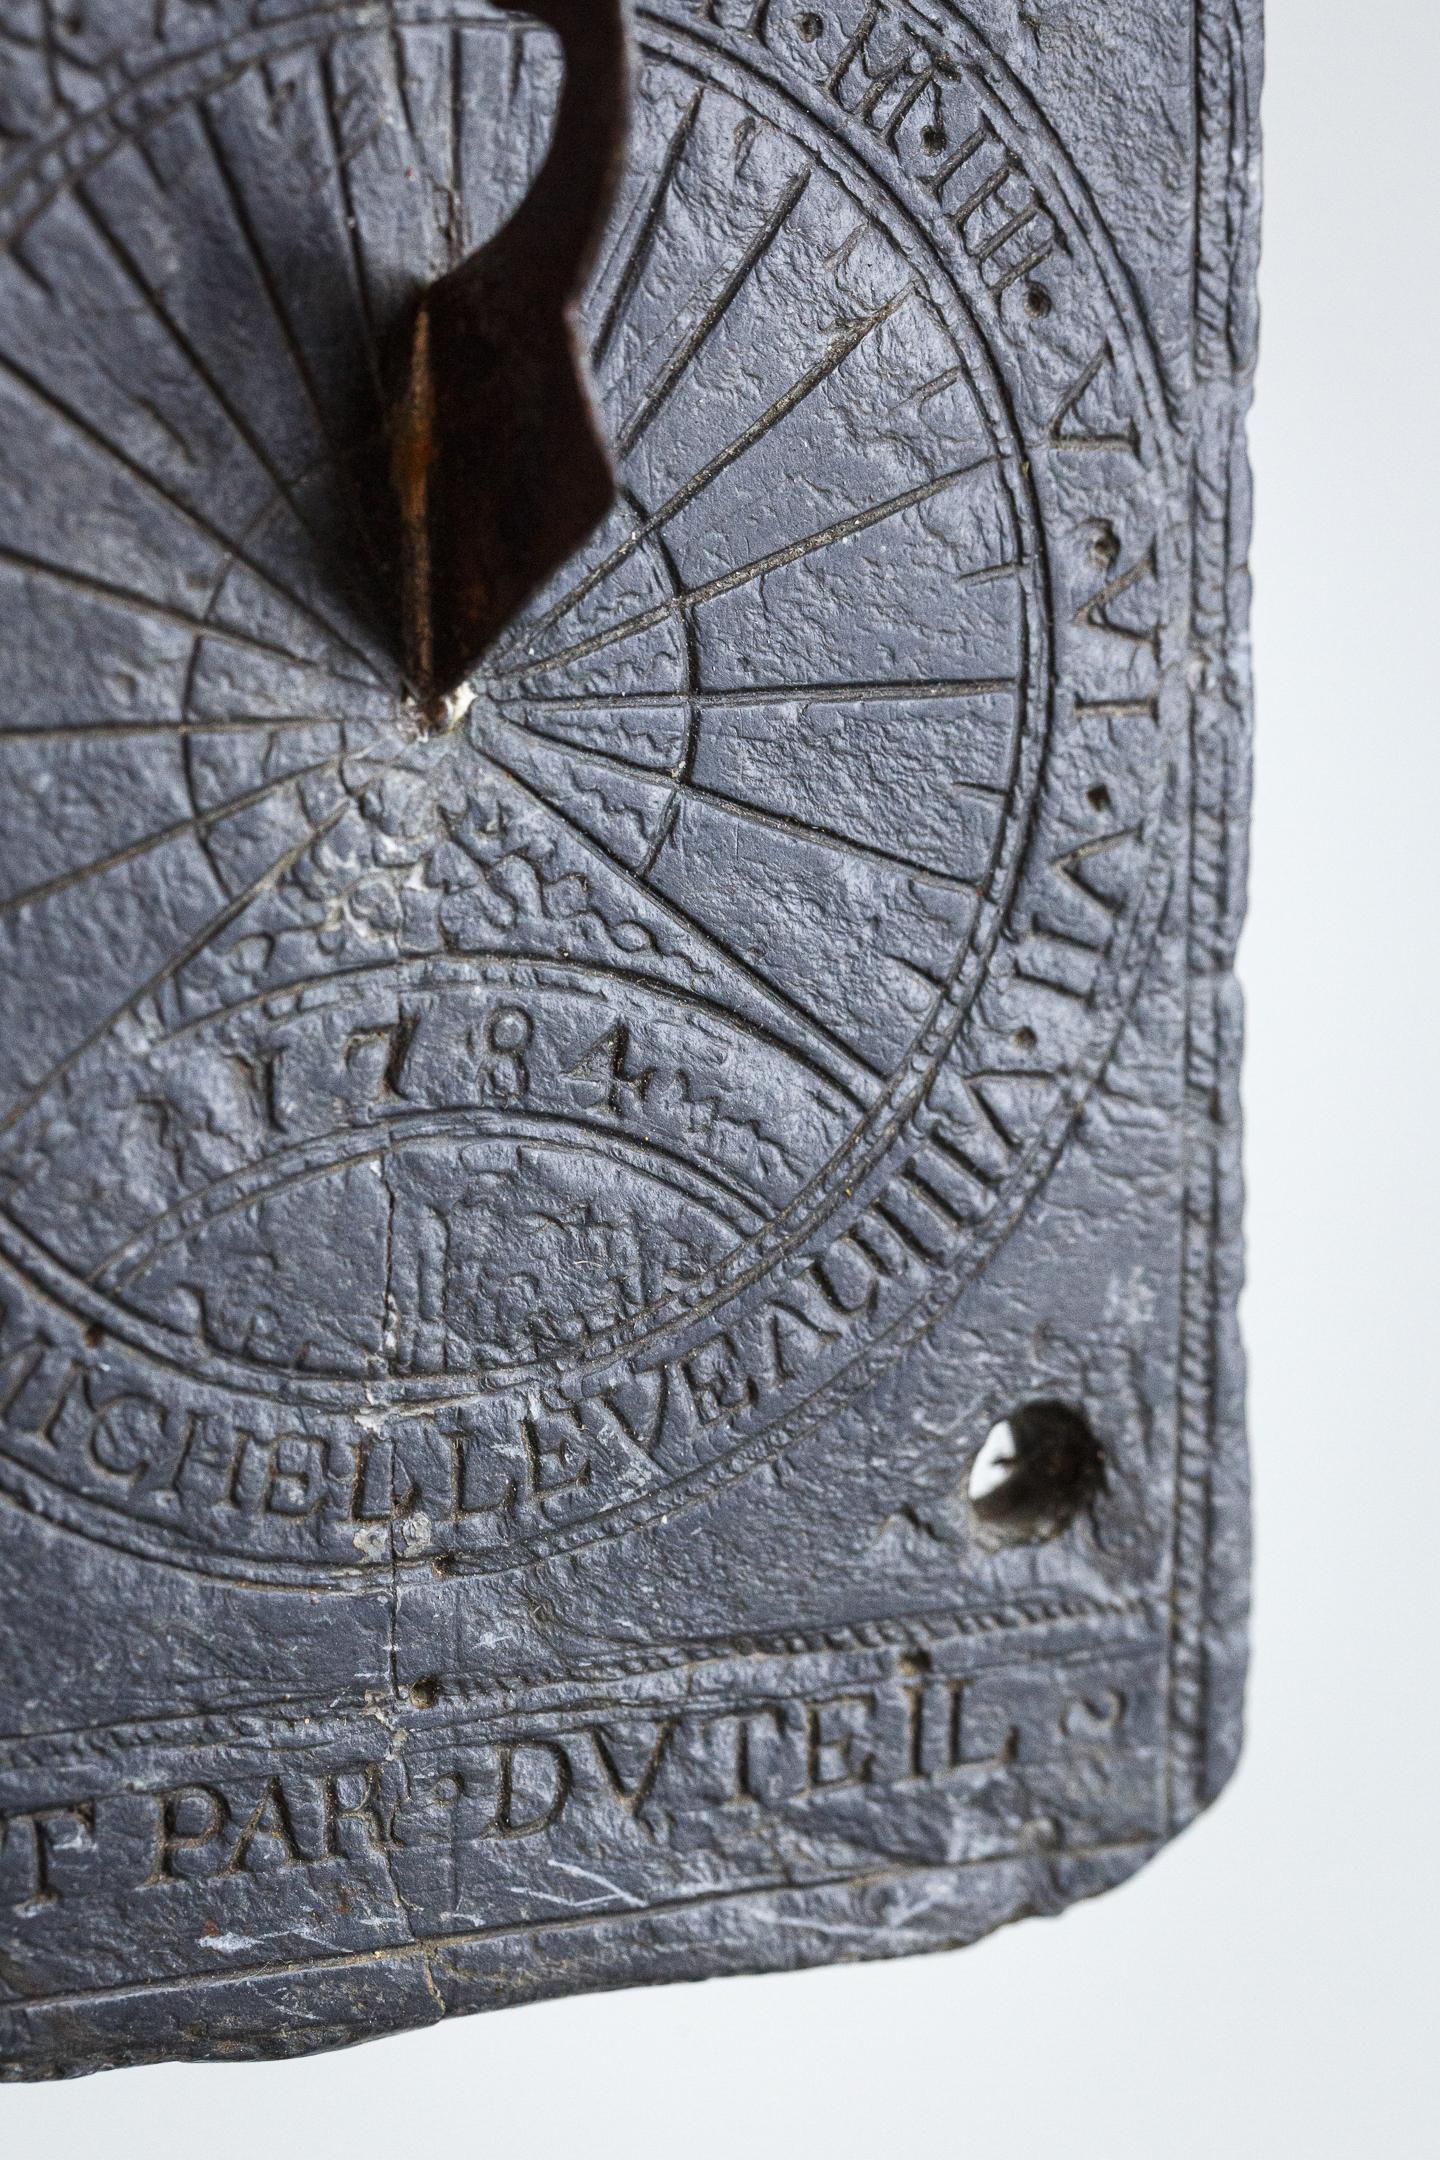 Rare Diminutive 18th Century Sundial Plate Signed and Dated For Sale 8